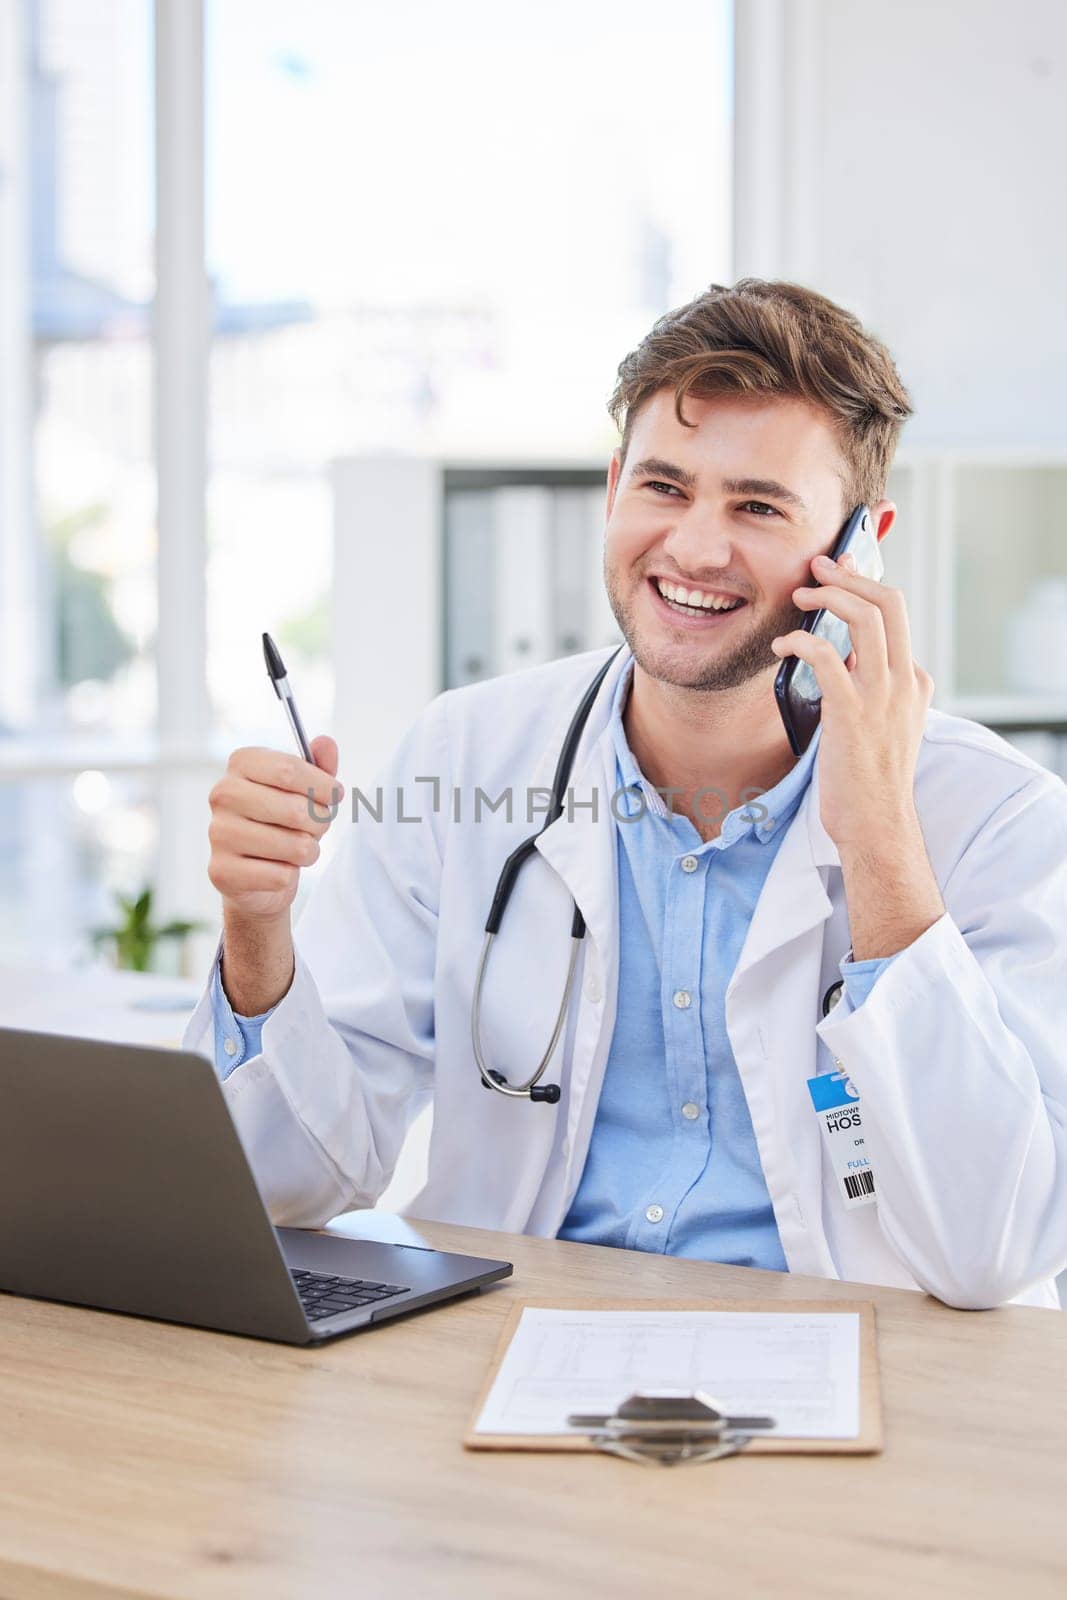 Man, doctor or phone call in hospital office for networking, life insurance help or surgery planning. Smile, happy or talking healthcare worker and communication technology, laptop or clipboard paper.